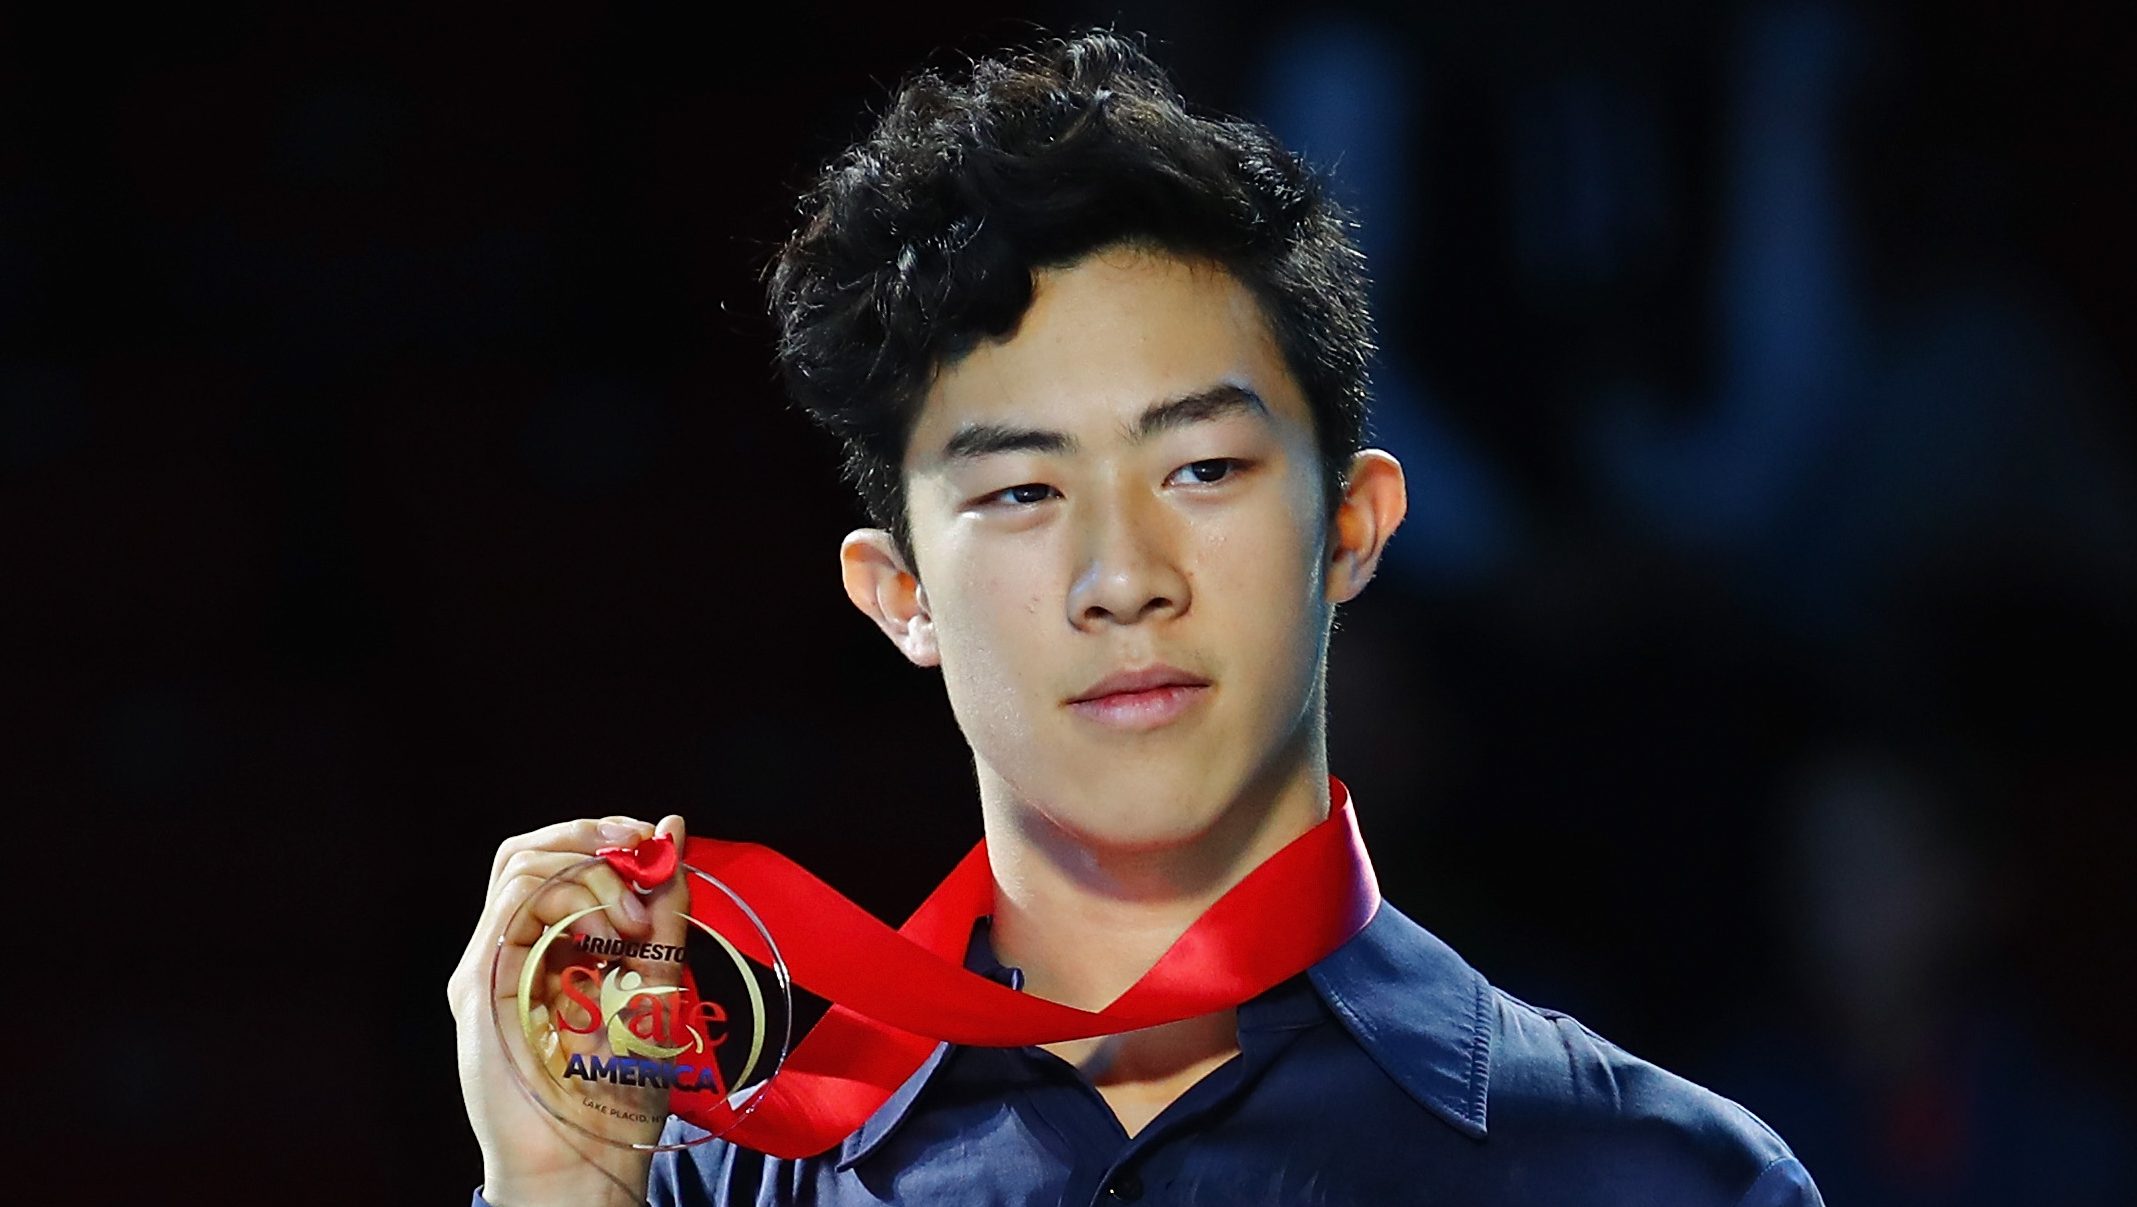 Nathan Chen & Amber Glenn: 5 Fast Facts You Need to Know